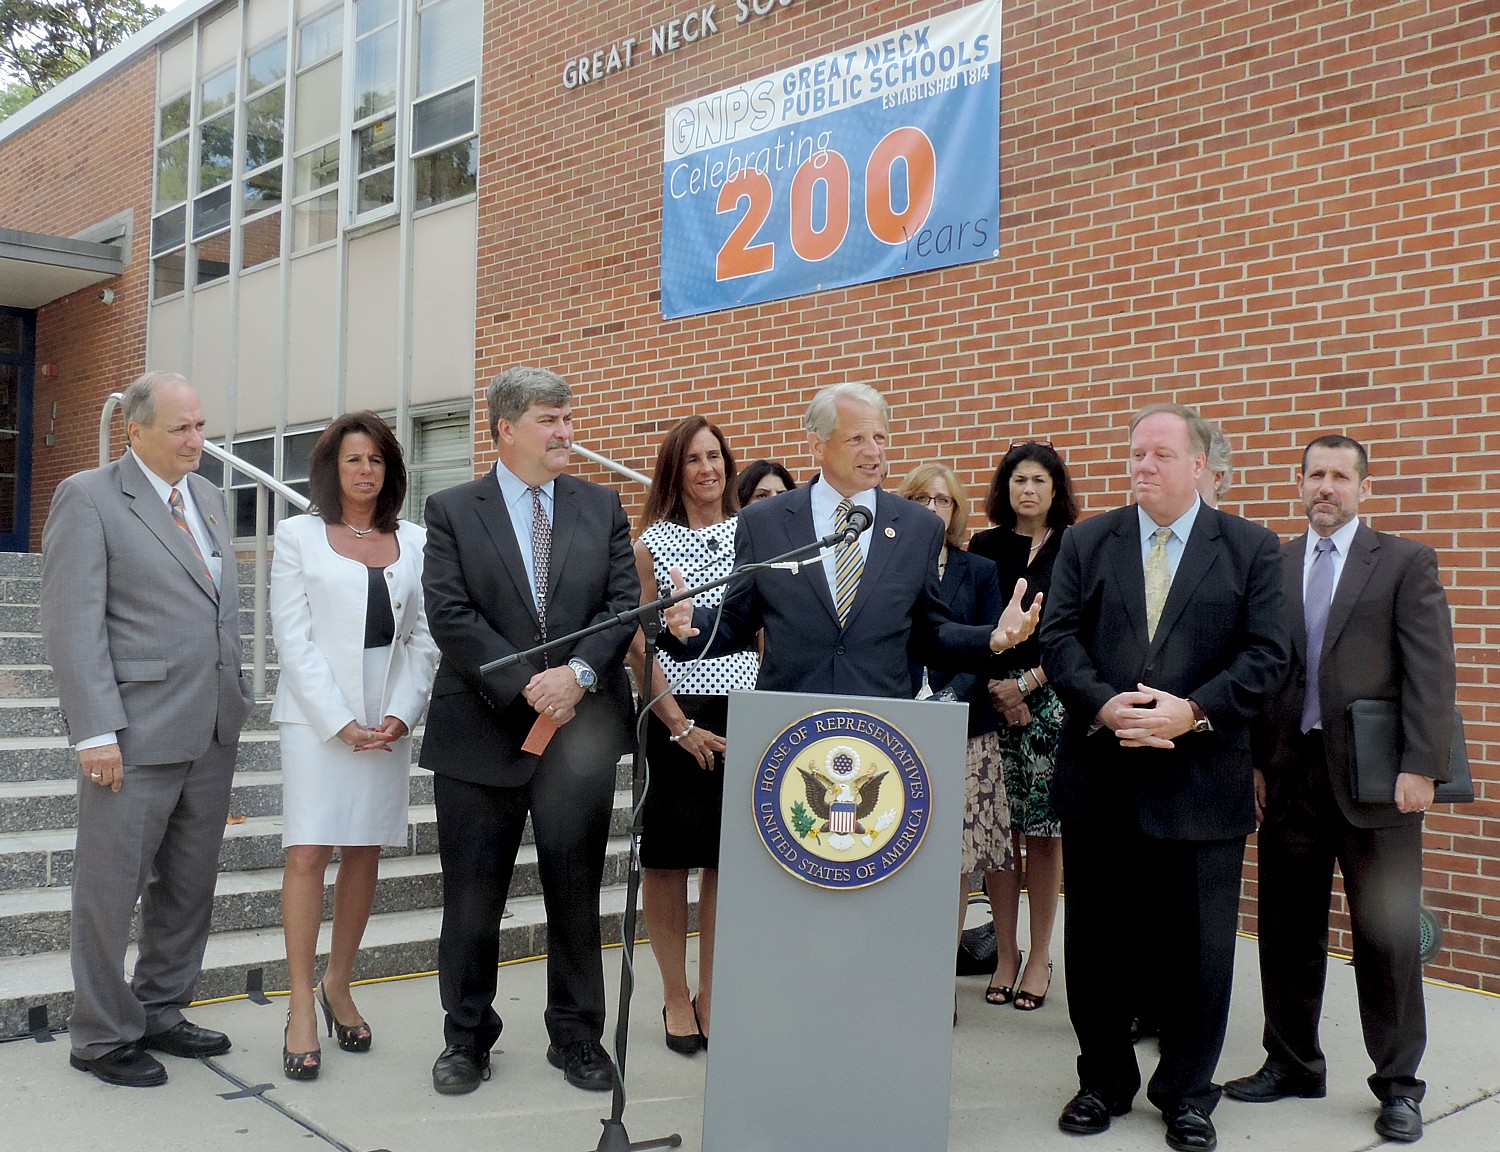 Outgoing US Congressman Steve Israel with Great Neck (marking its 200th anniversary as a public school district) and Long Island educators, in front of Great Neck South Middle School, appeals for the Department of Education to change its rules regarding over-testing. The White House has just announced new steps to create “better, fairer and fewer tests” © 2016 Karen Rubin/news-photos-features.com